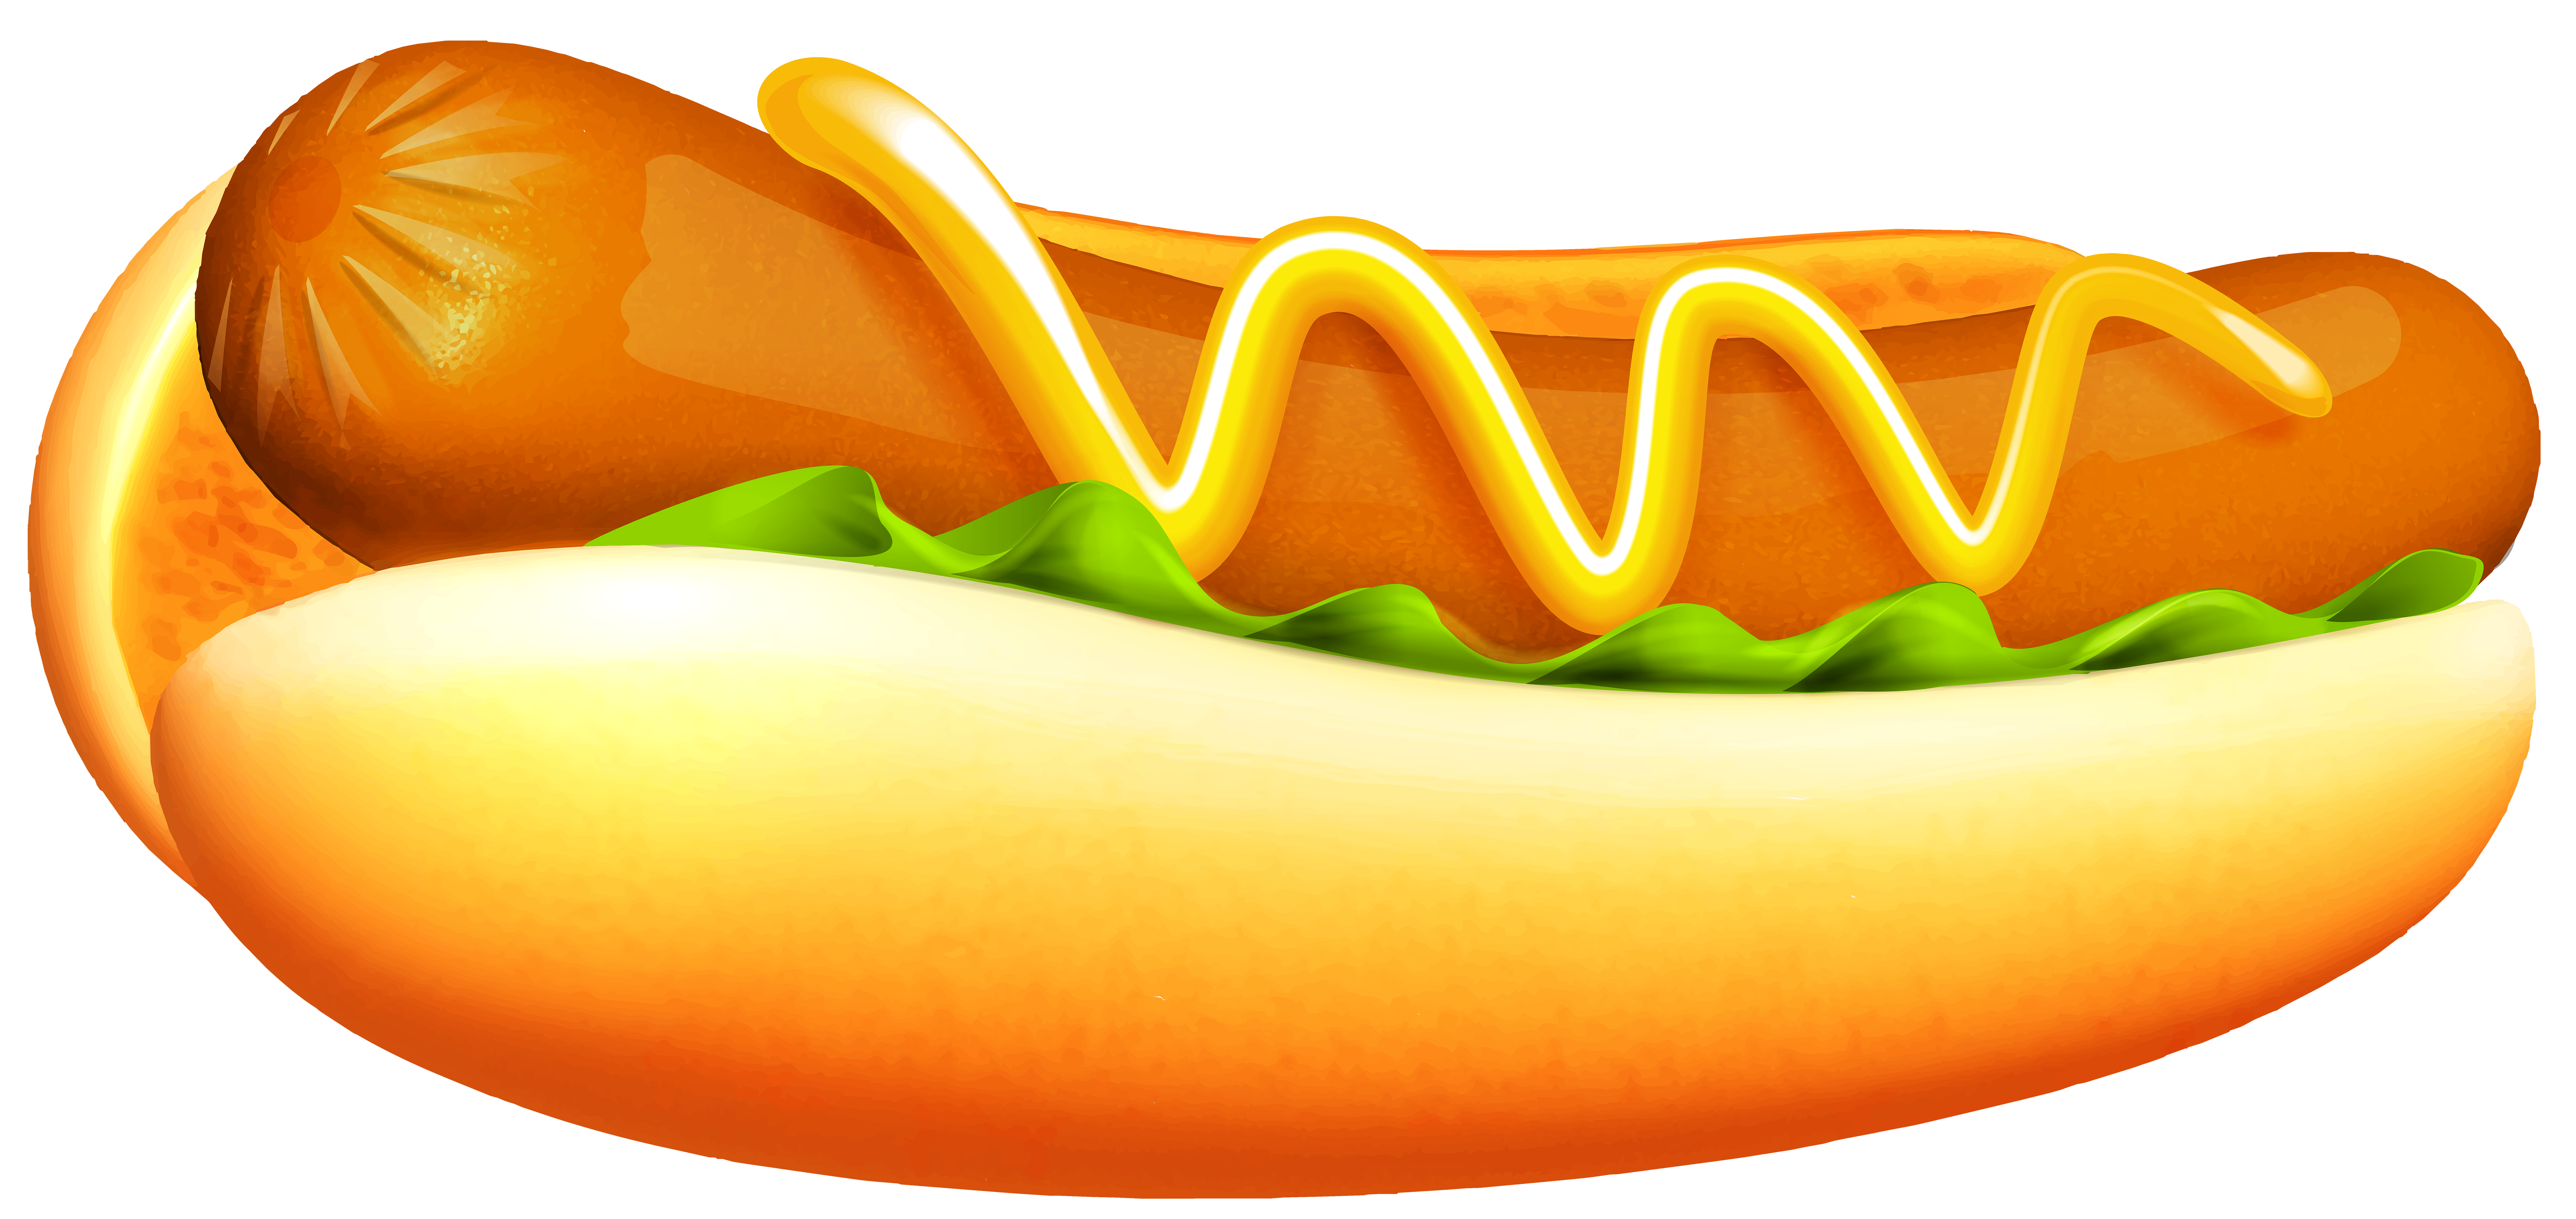 free clipart images of hot dogs - photo #37